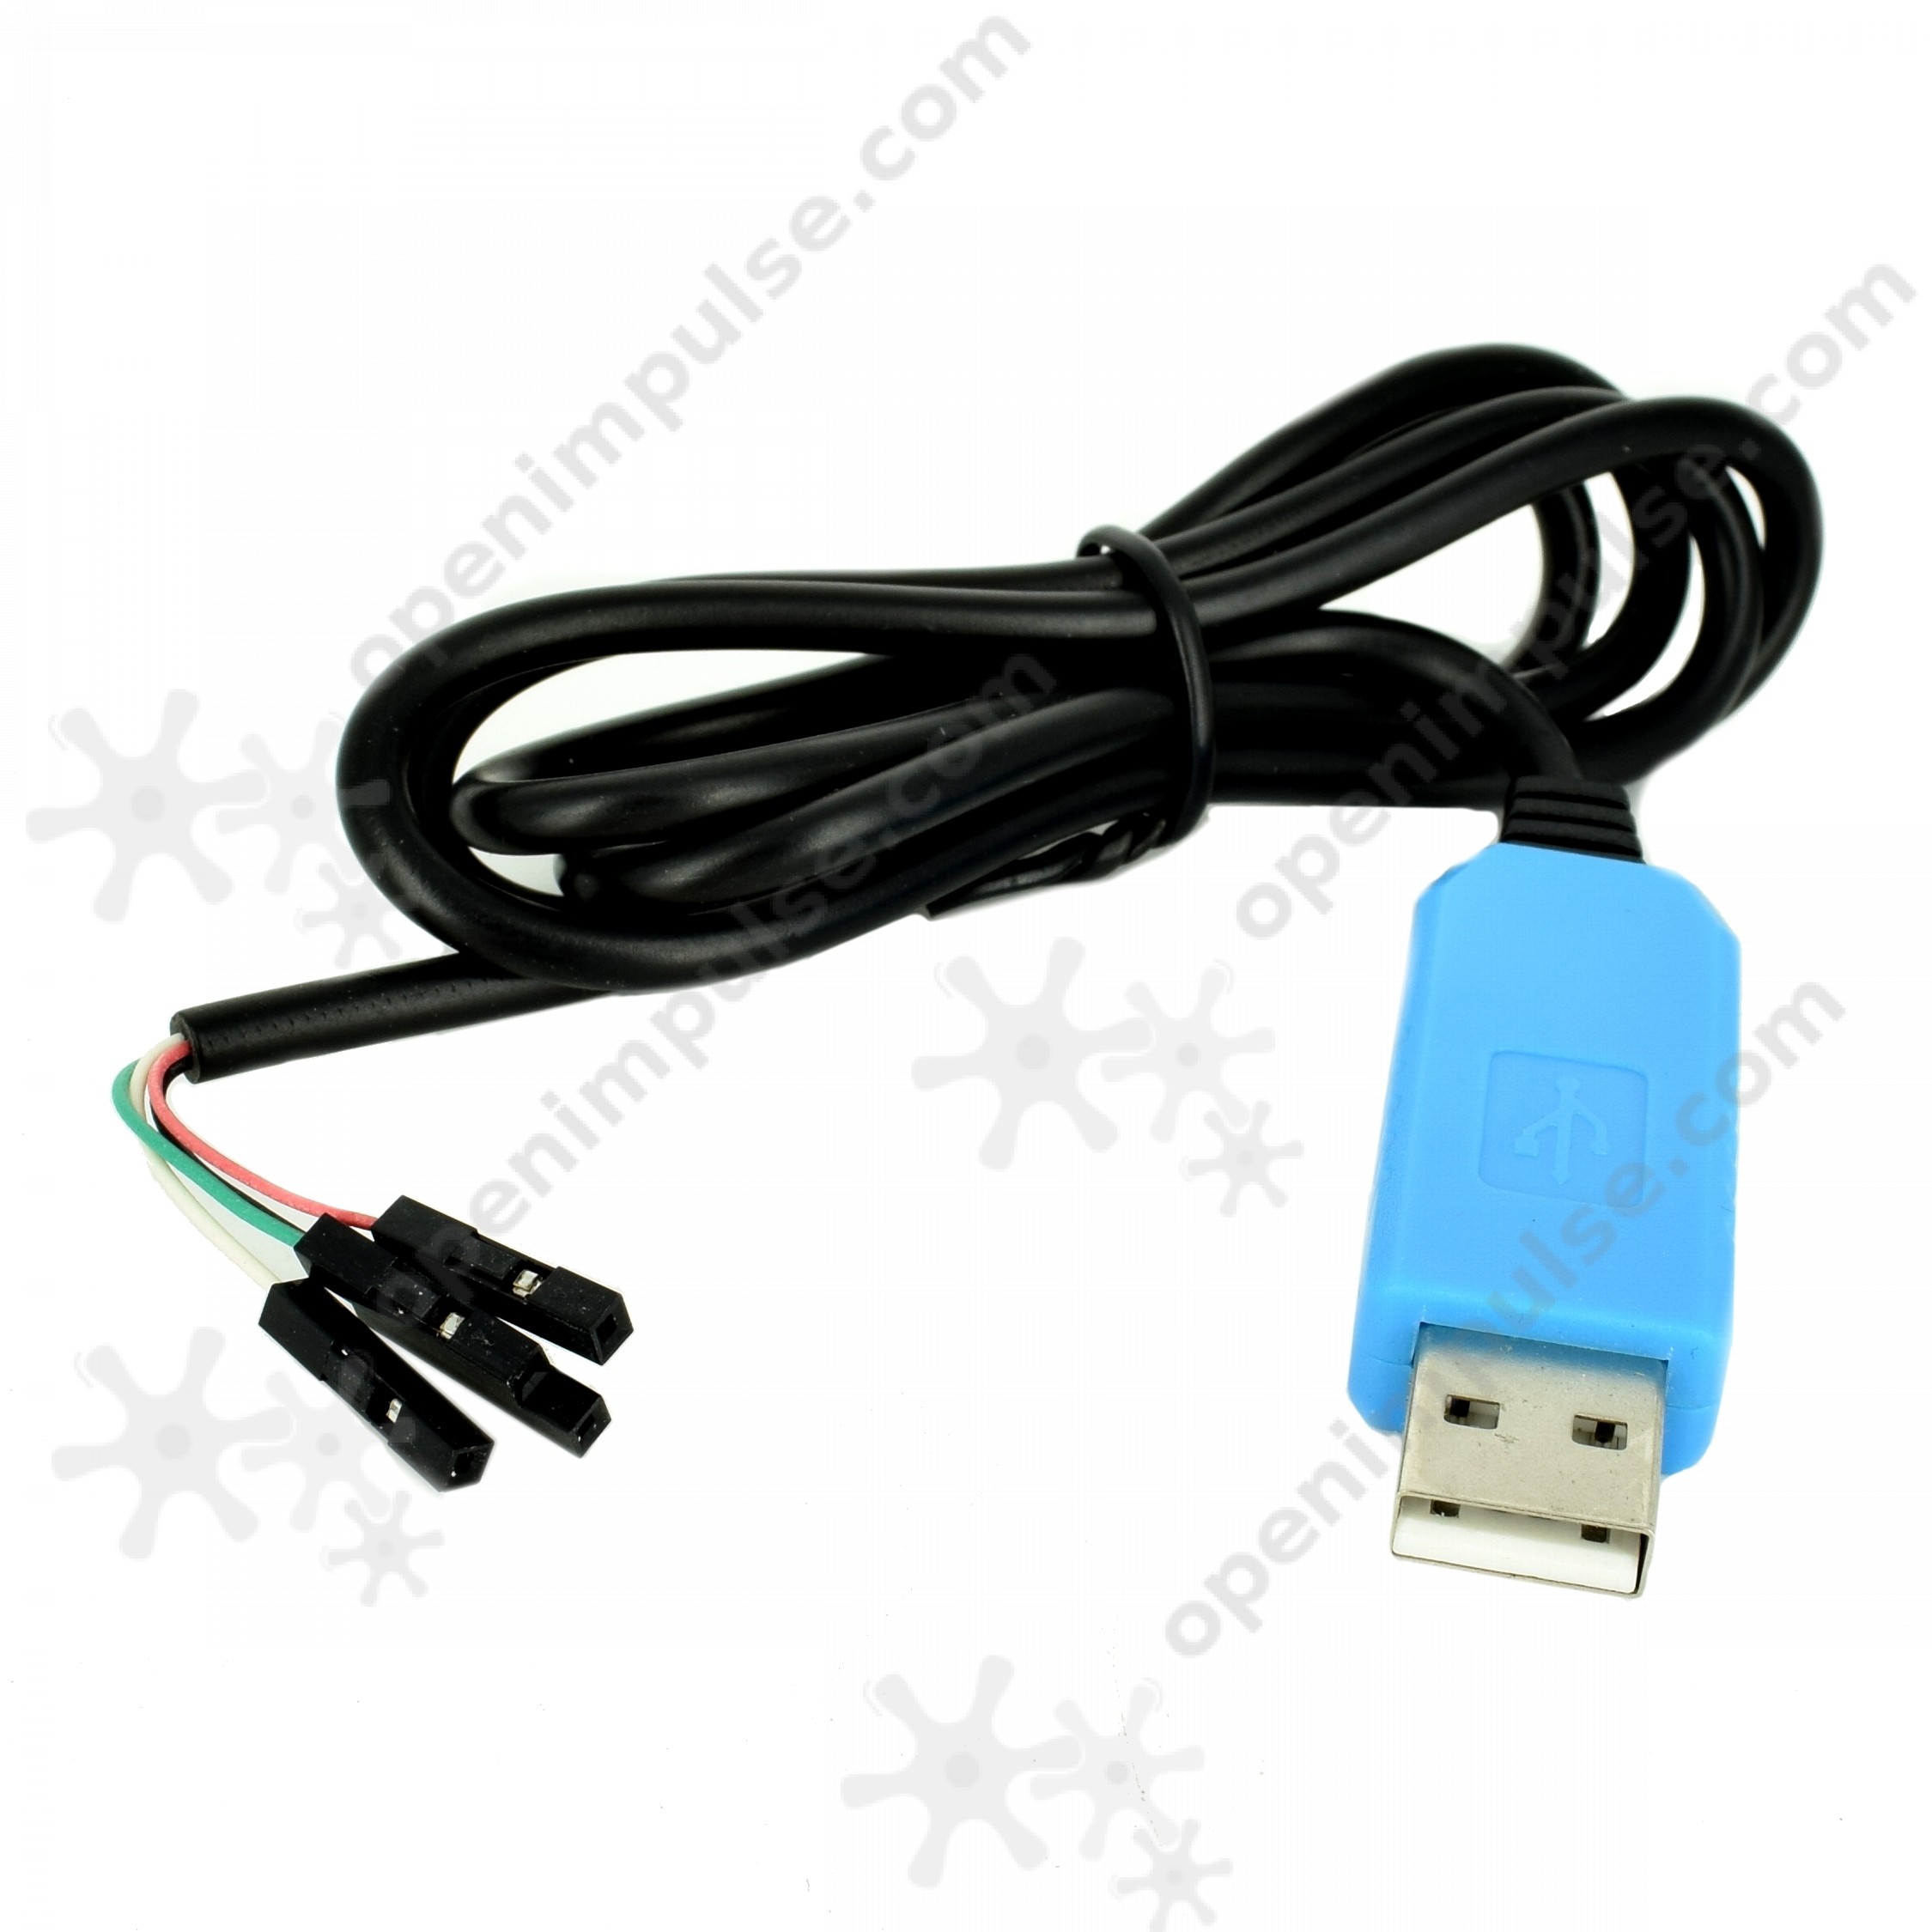 PL2303TA USB to TTL RS232 4 Pin Serial Converter Cable for Win 7/8/8.1 Universal